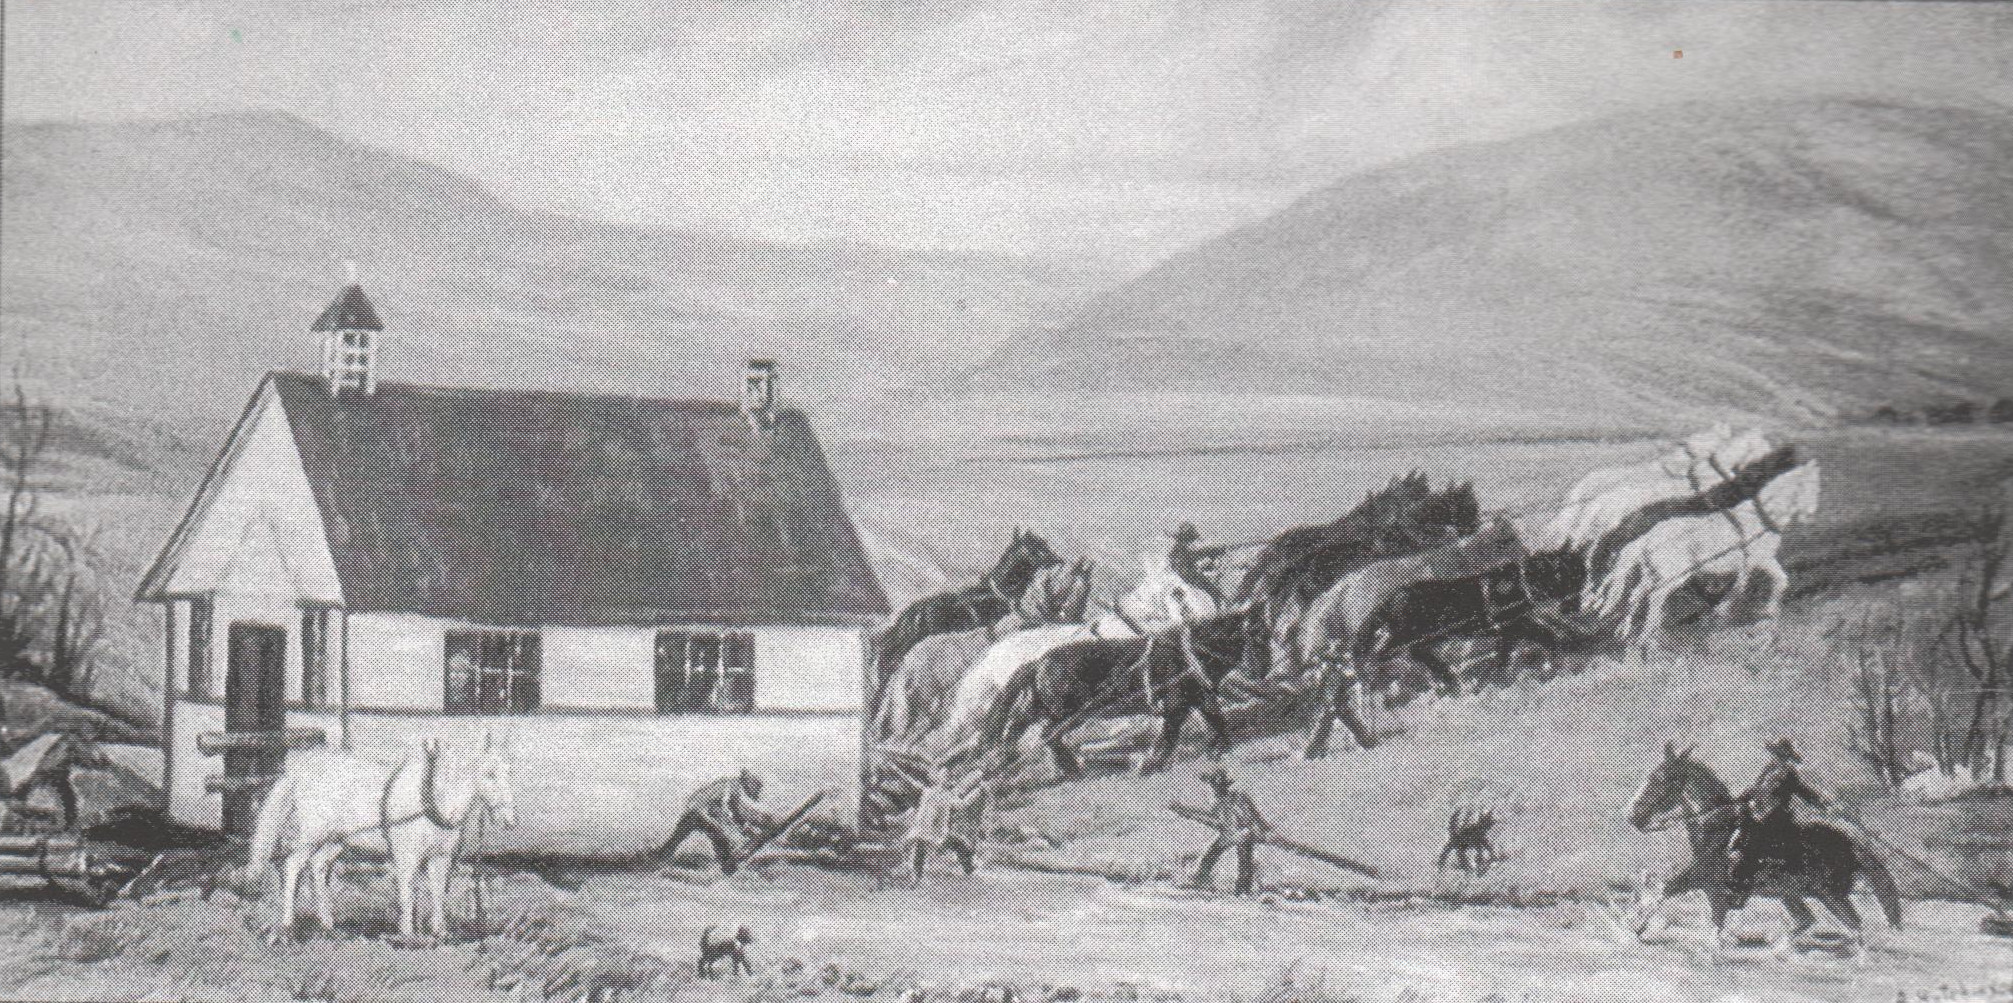 Painting by A. Hutchinson of the move from Mitford to Cochrane.